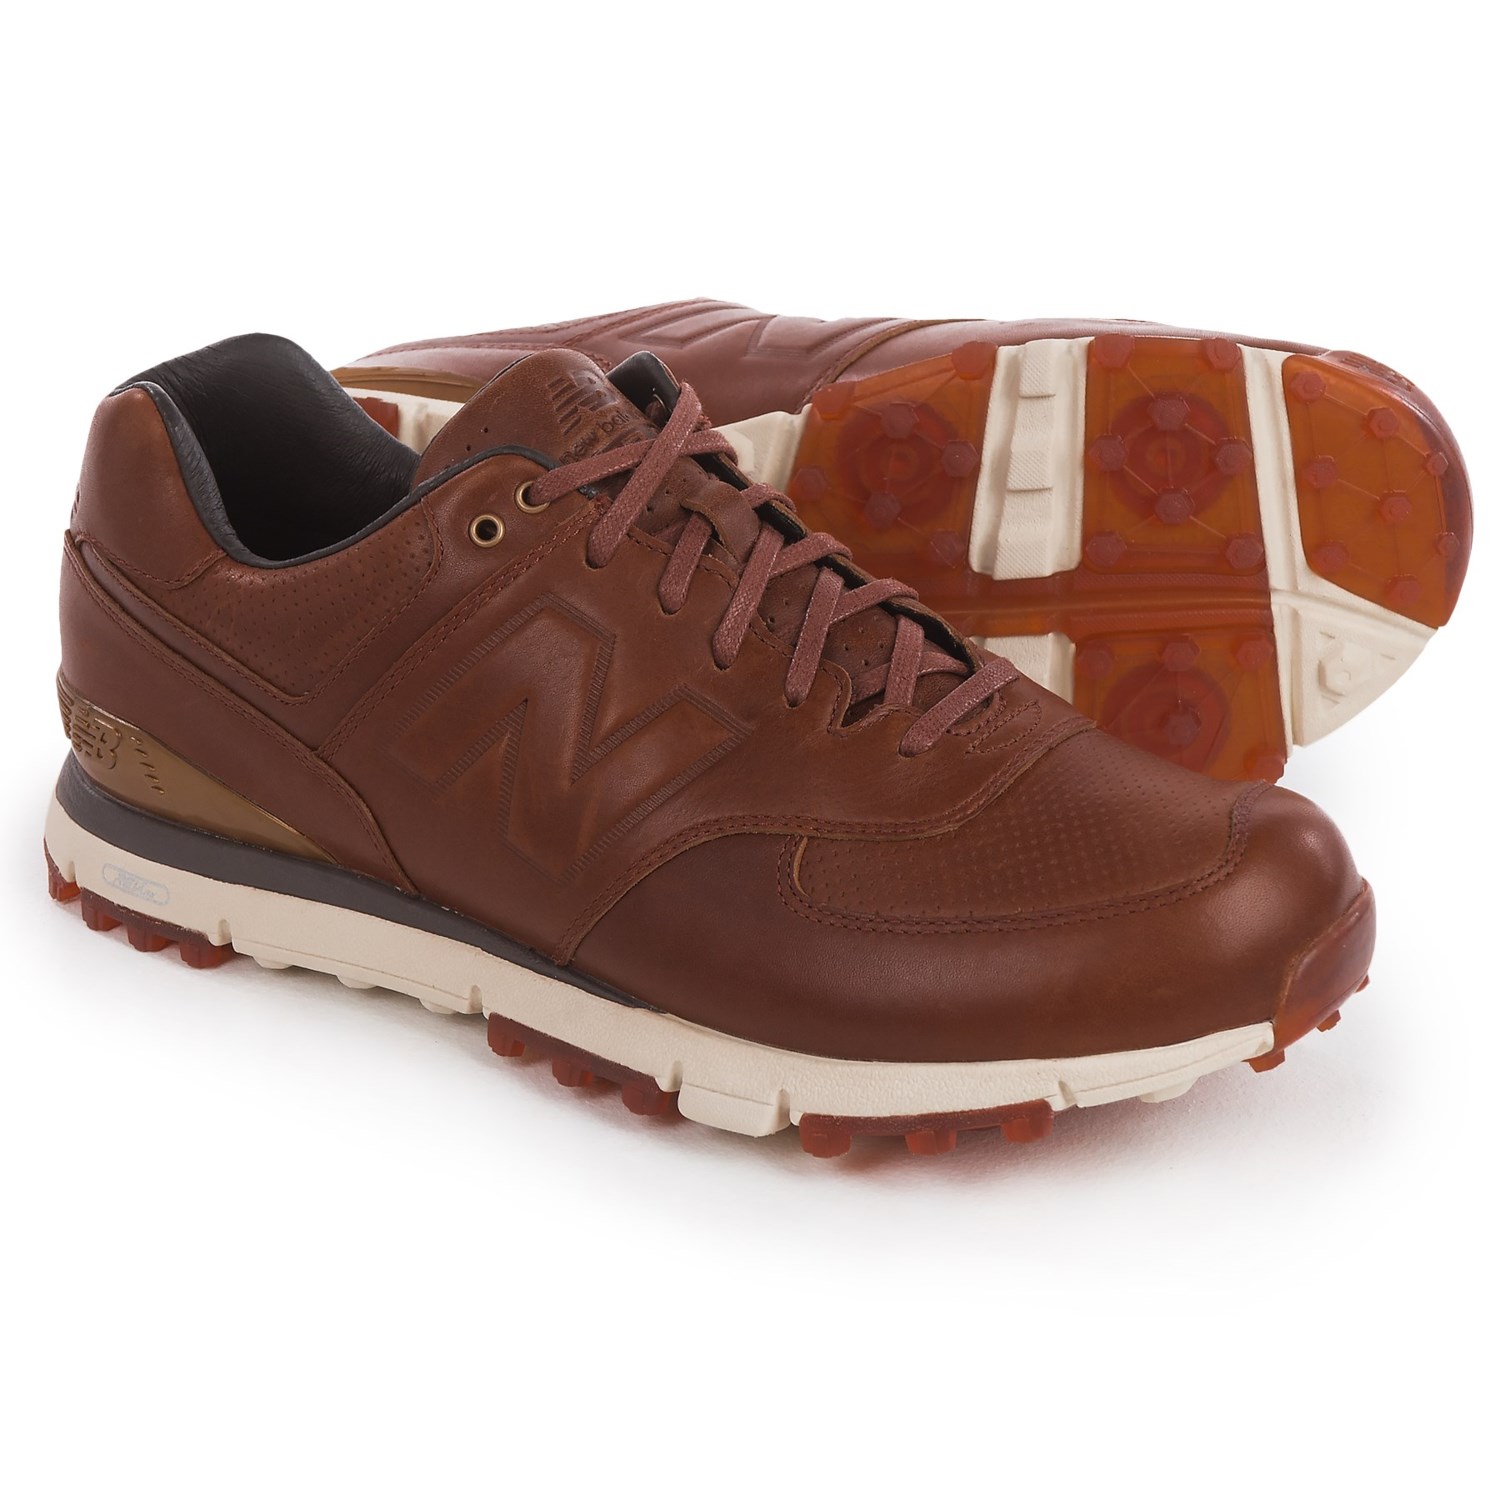 New Balance 574 LX Golf Shoes - Waterproof, Leather (For Men) in Leather